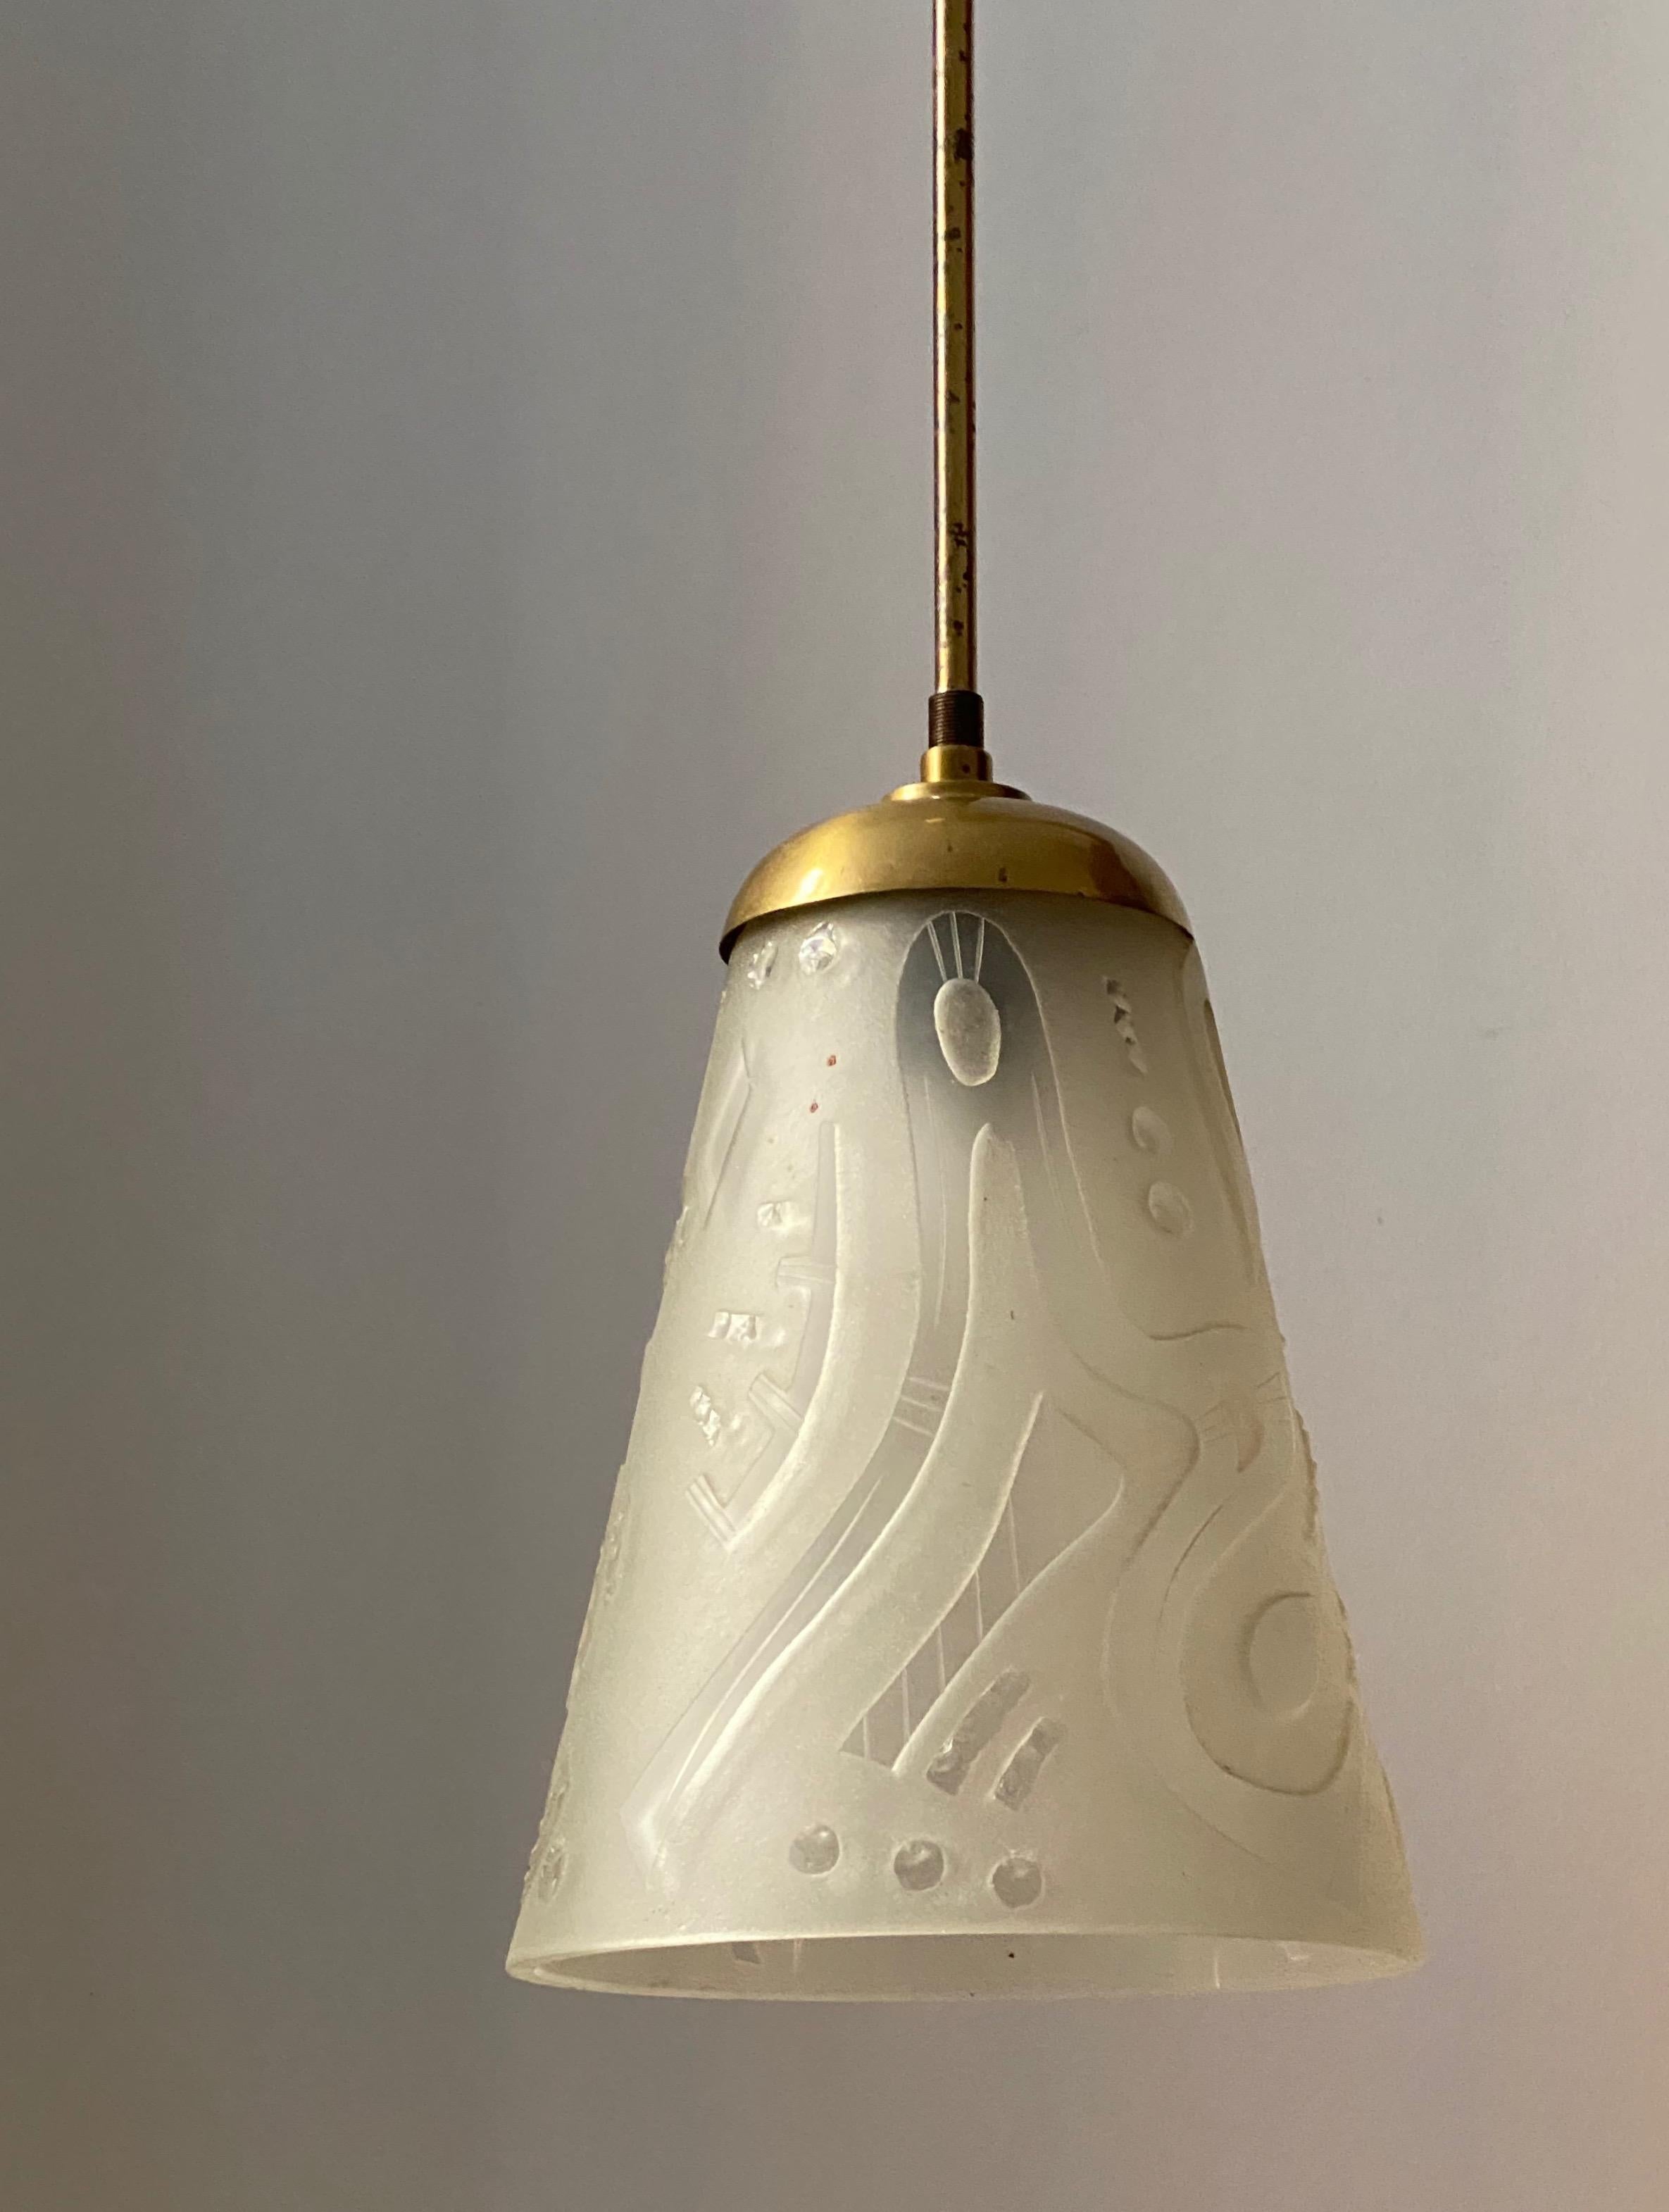 A pendant light. Designed and produced in Sweden, c. 1940s-1950s. Features cut and frosted glass and brass.

Other designers of the period include Hans Bergström, Paavo Tynell, Hans Agne Jakobsson, and Lisa Johansson-Pape.